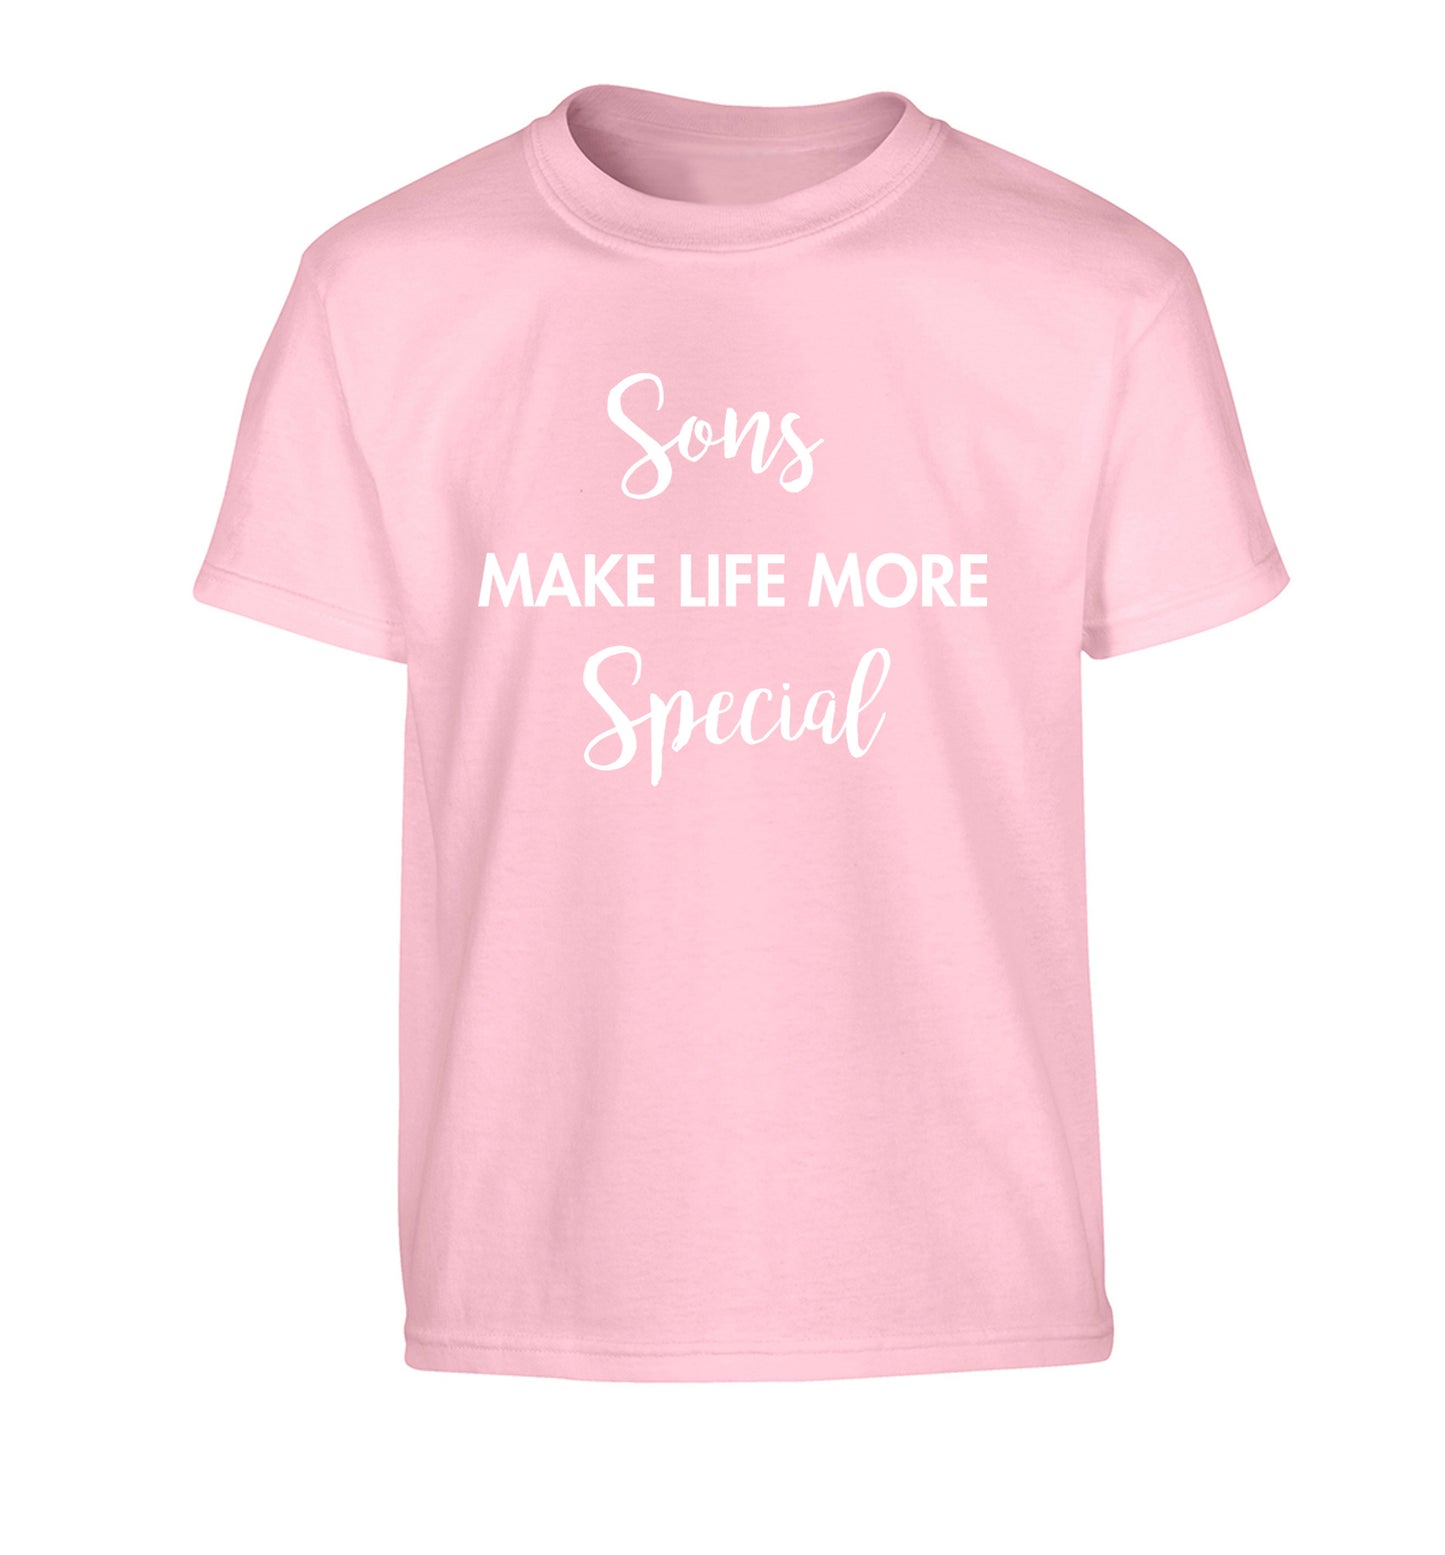 Sons make life more special Children's light pink Tshirt 12-14 Years